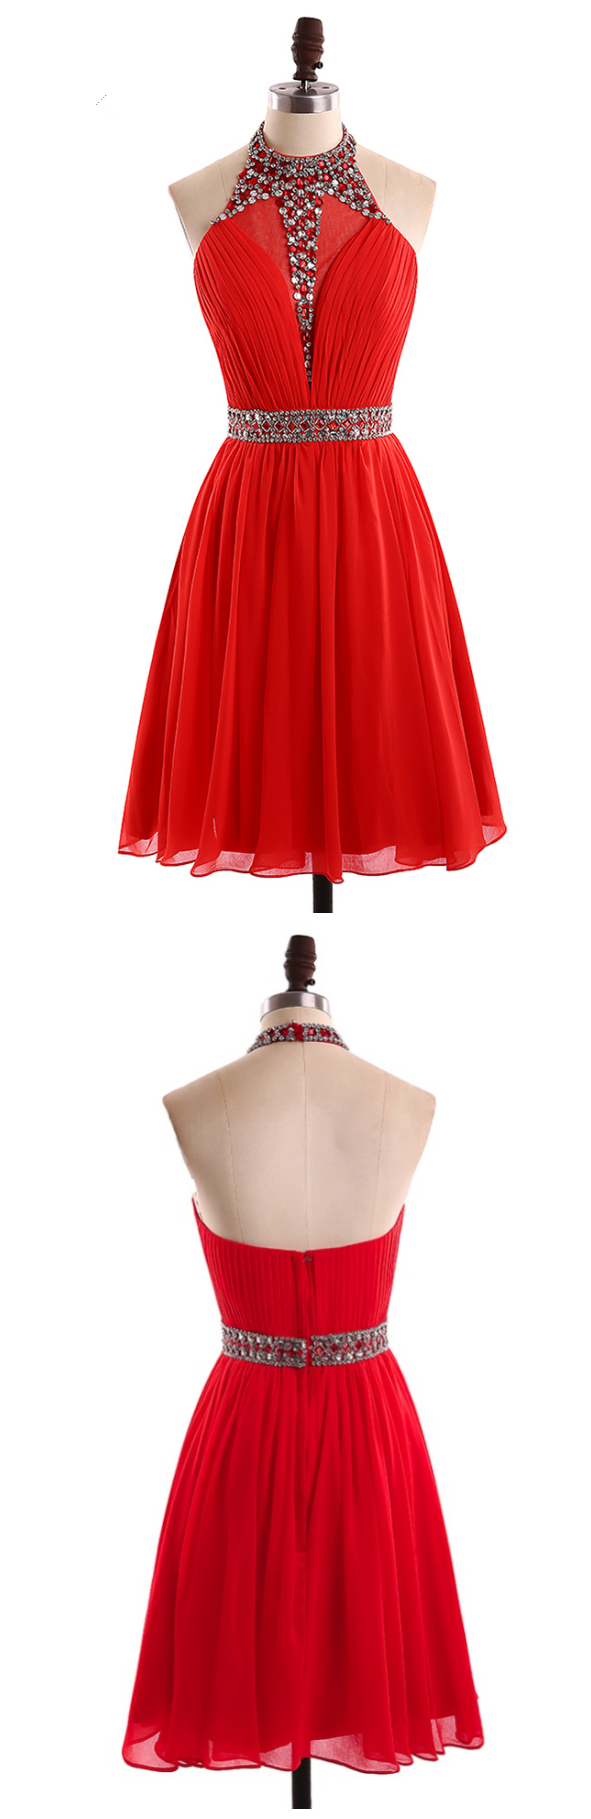 Red Short Cocktail Dresses ,Sleeveless A Line Beading Chiffon Above ...